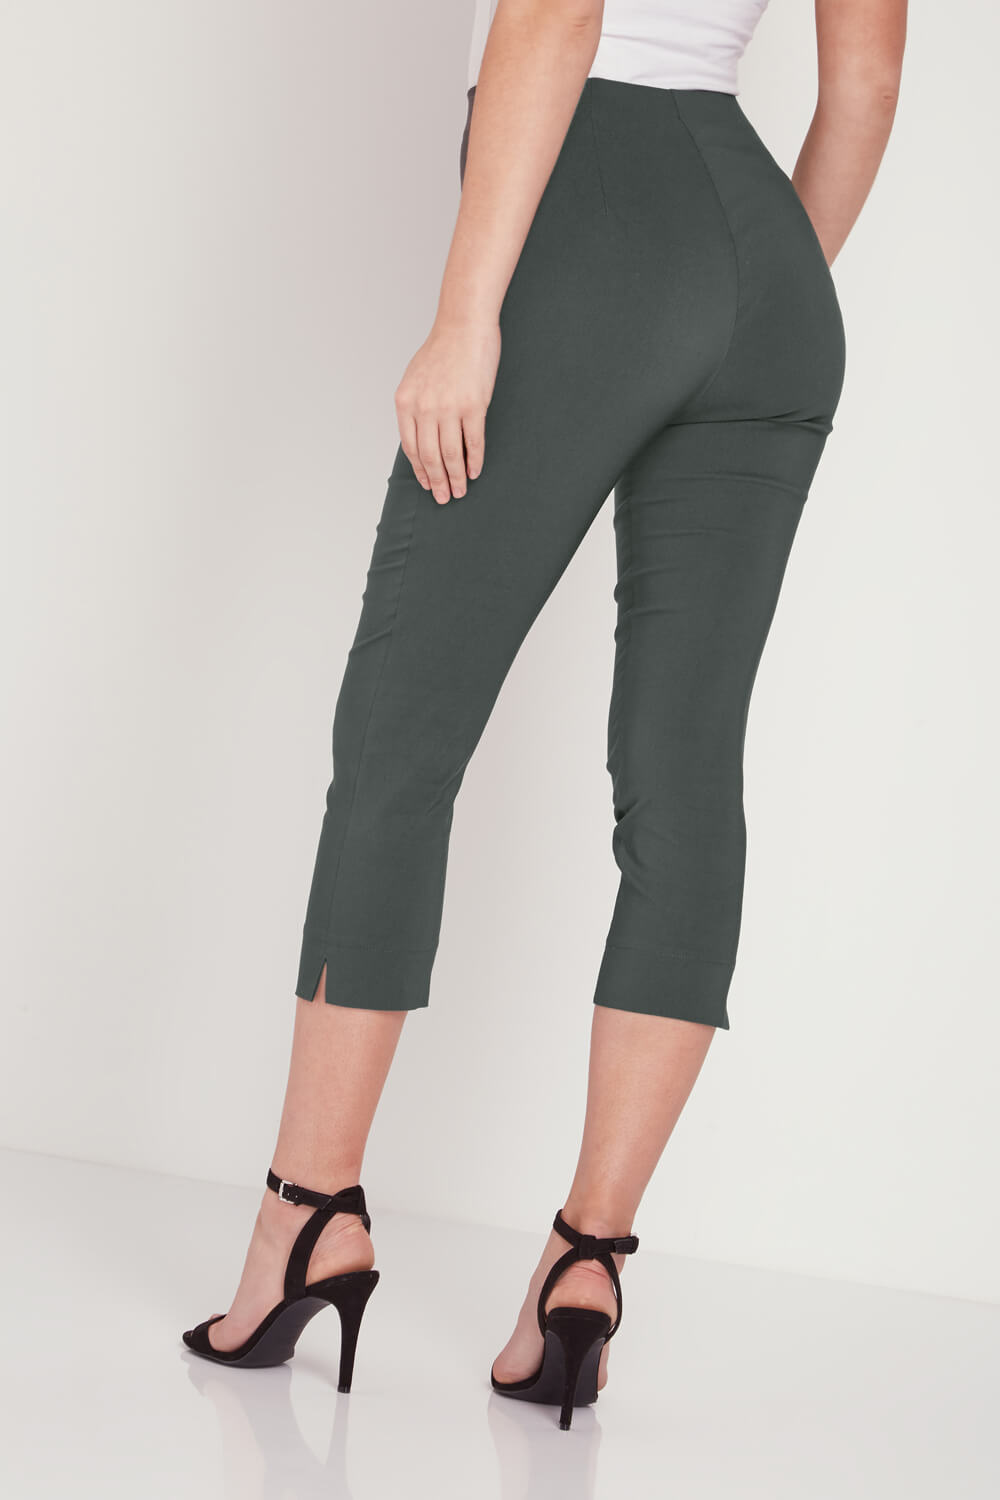 Bottle Green Cropped Stretch Trouser, Image 3 of 5